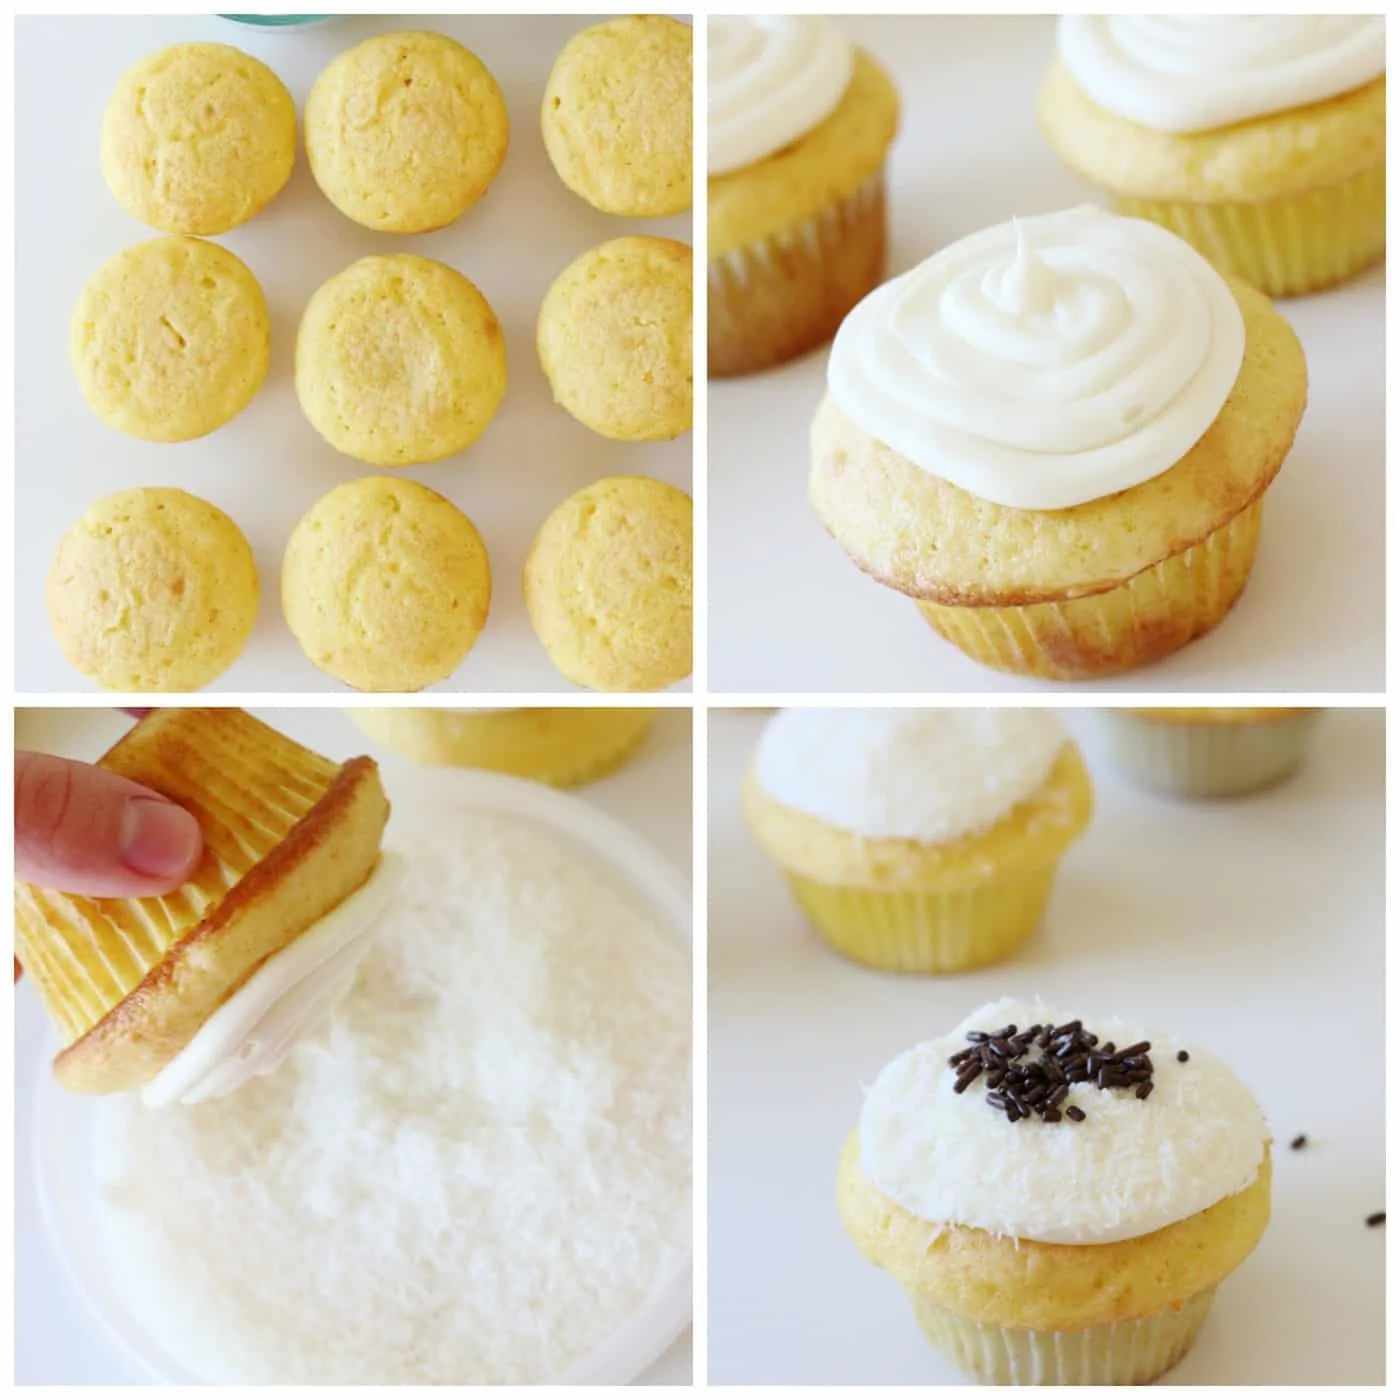 Dipping an iced vanilla cupcake in coconut